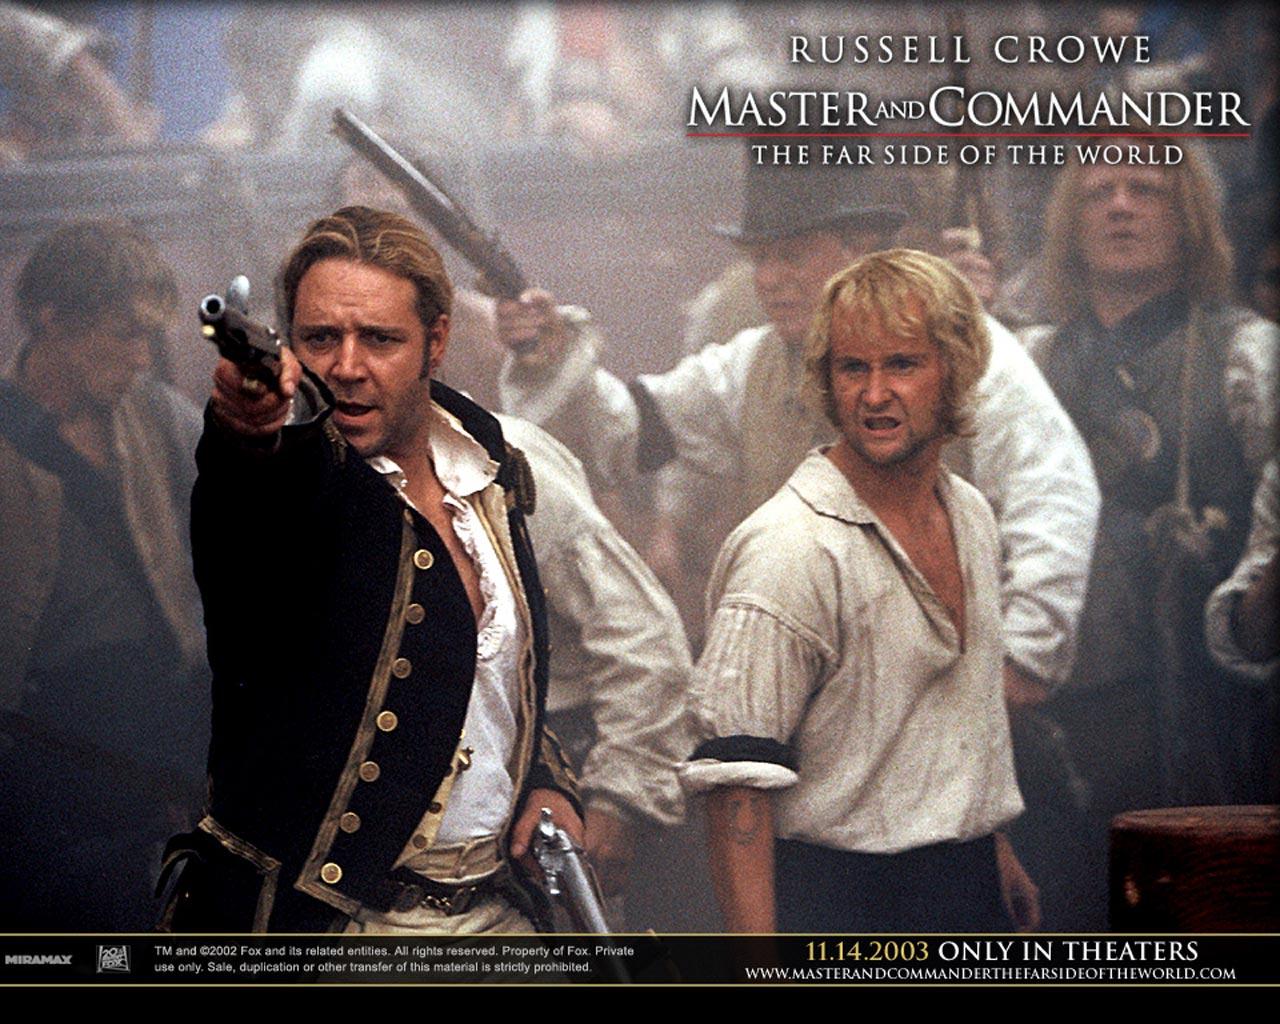 Master And Commander: The Far Side Of The World Wallpaper #4 1280 x 1024 